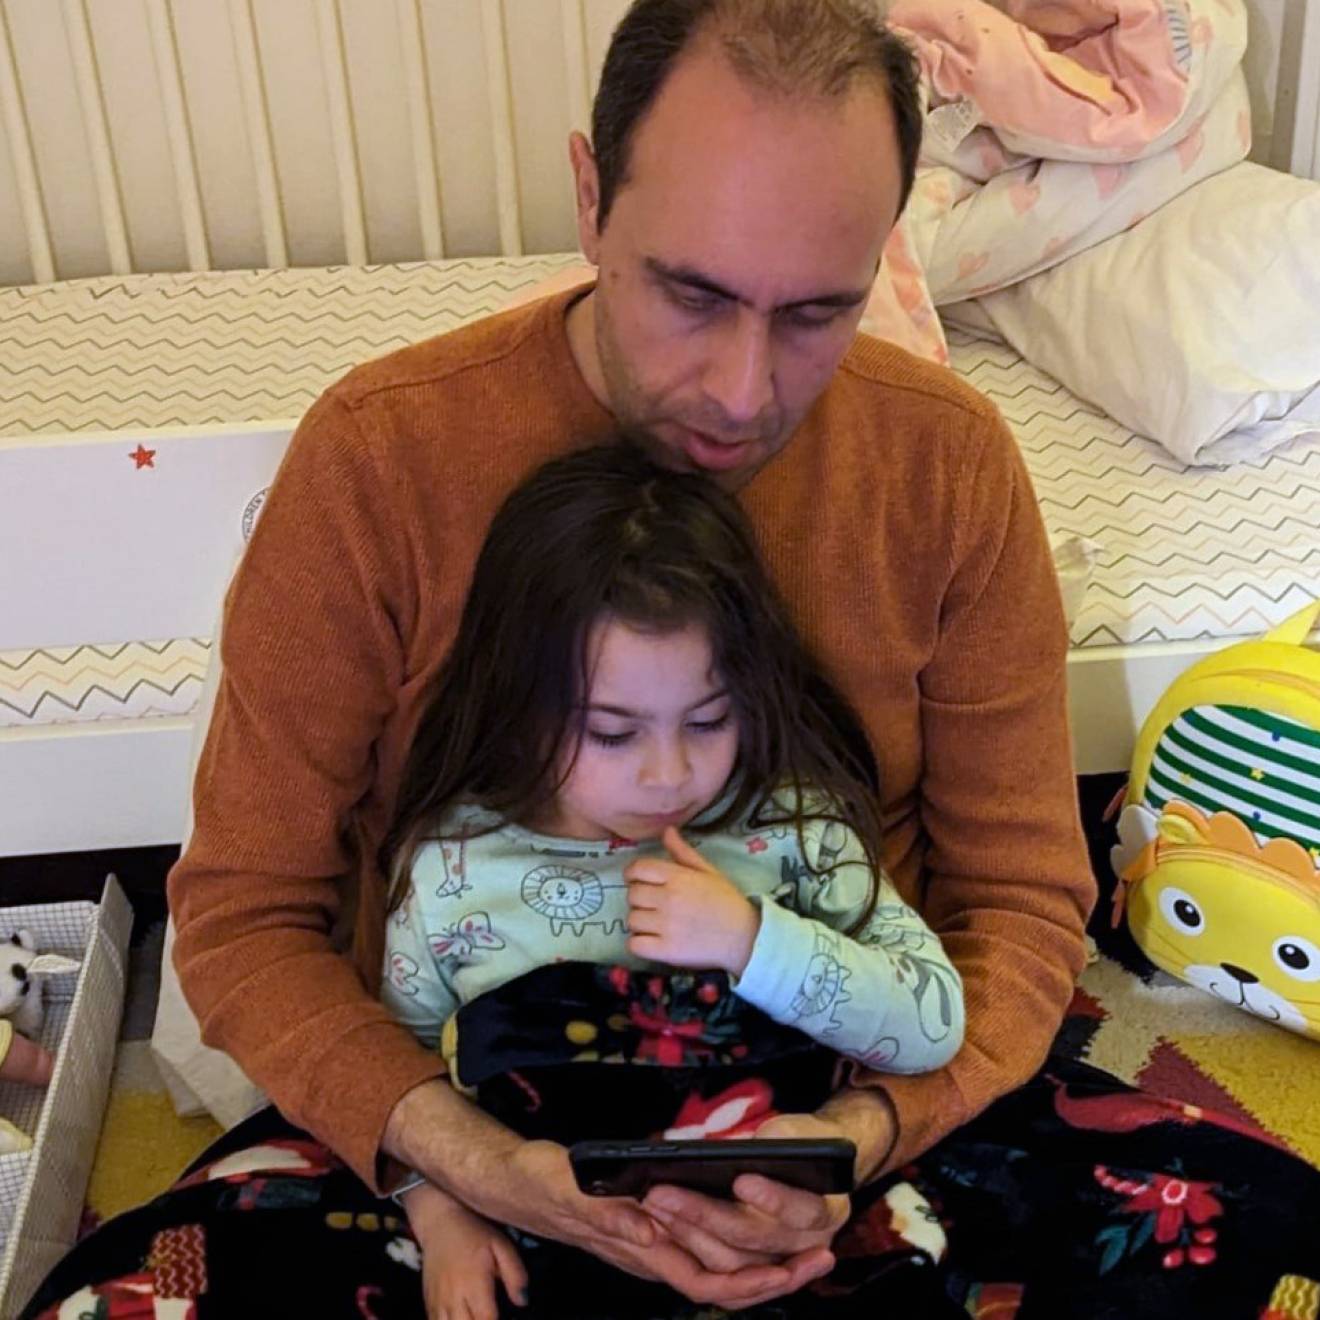 A balding man holds a young daughter as they read together, looking at a screen